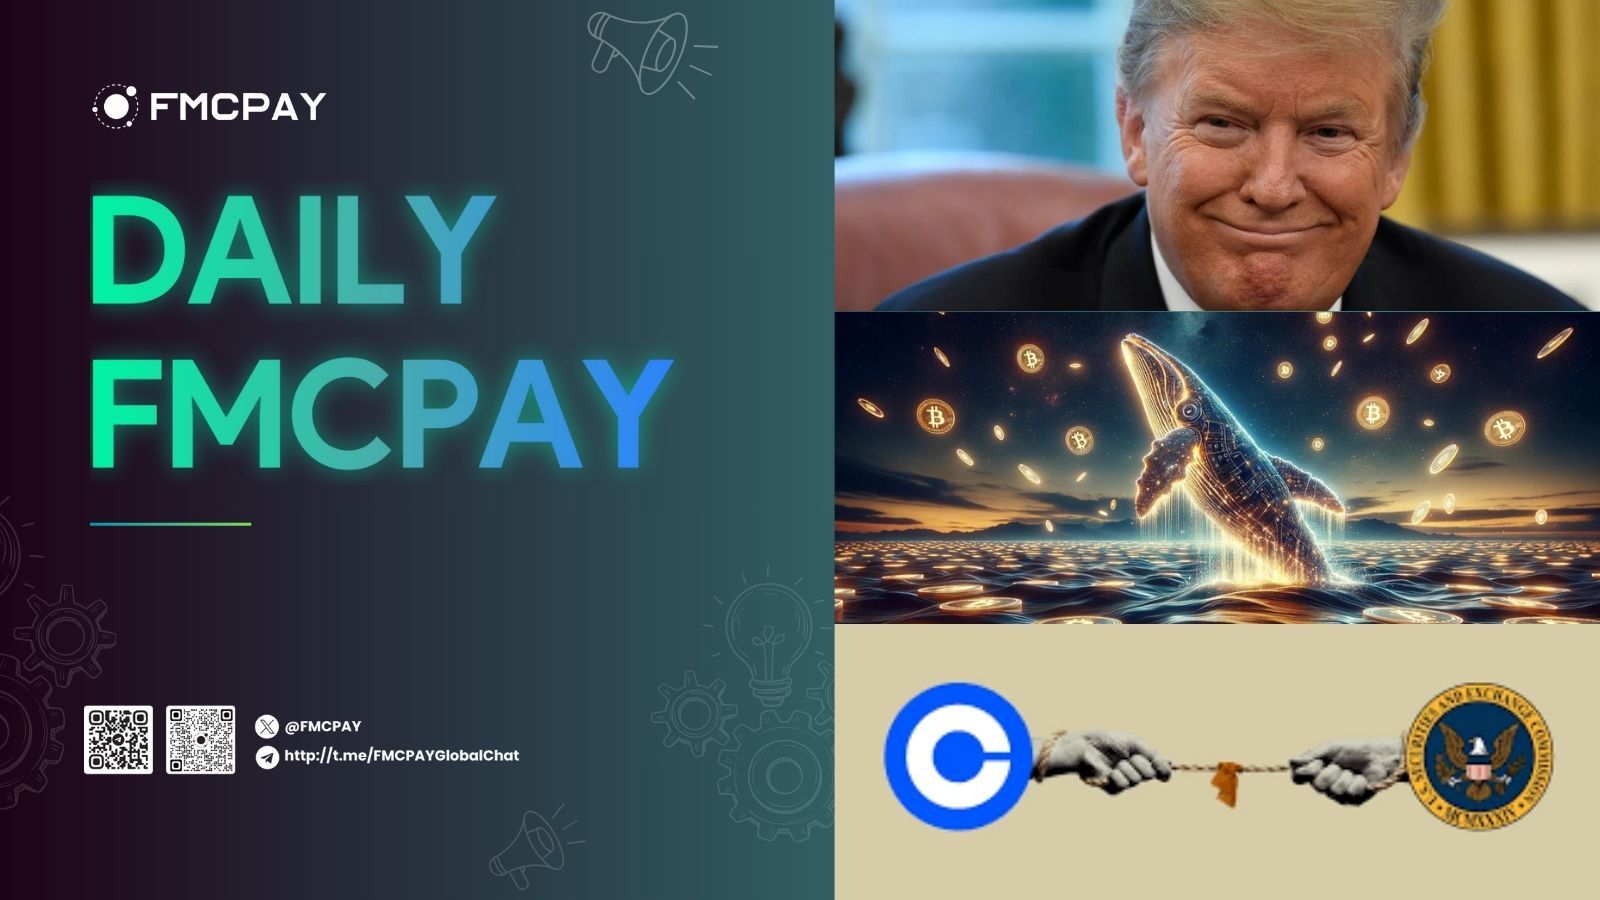 fmcpay donald trump presidency can trigger global hash war with btc reserves says bitcoin